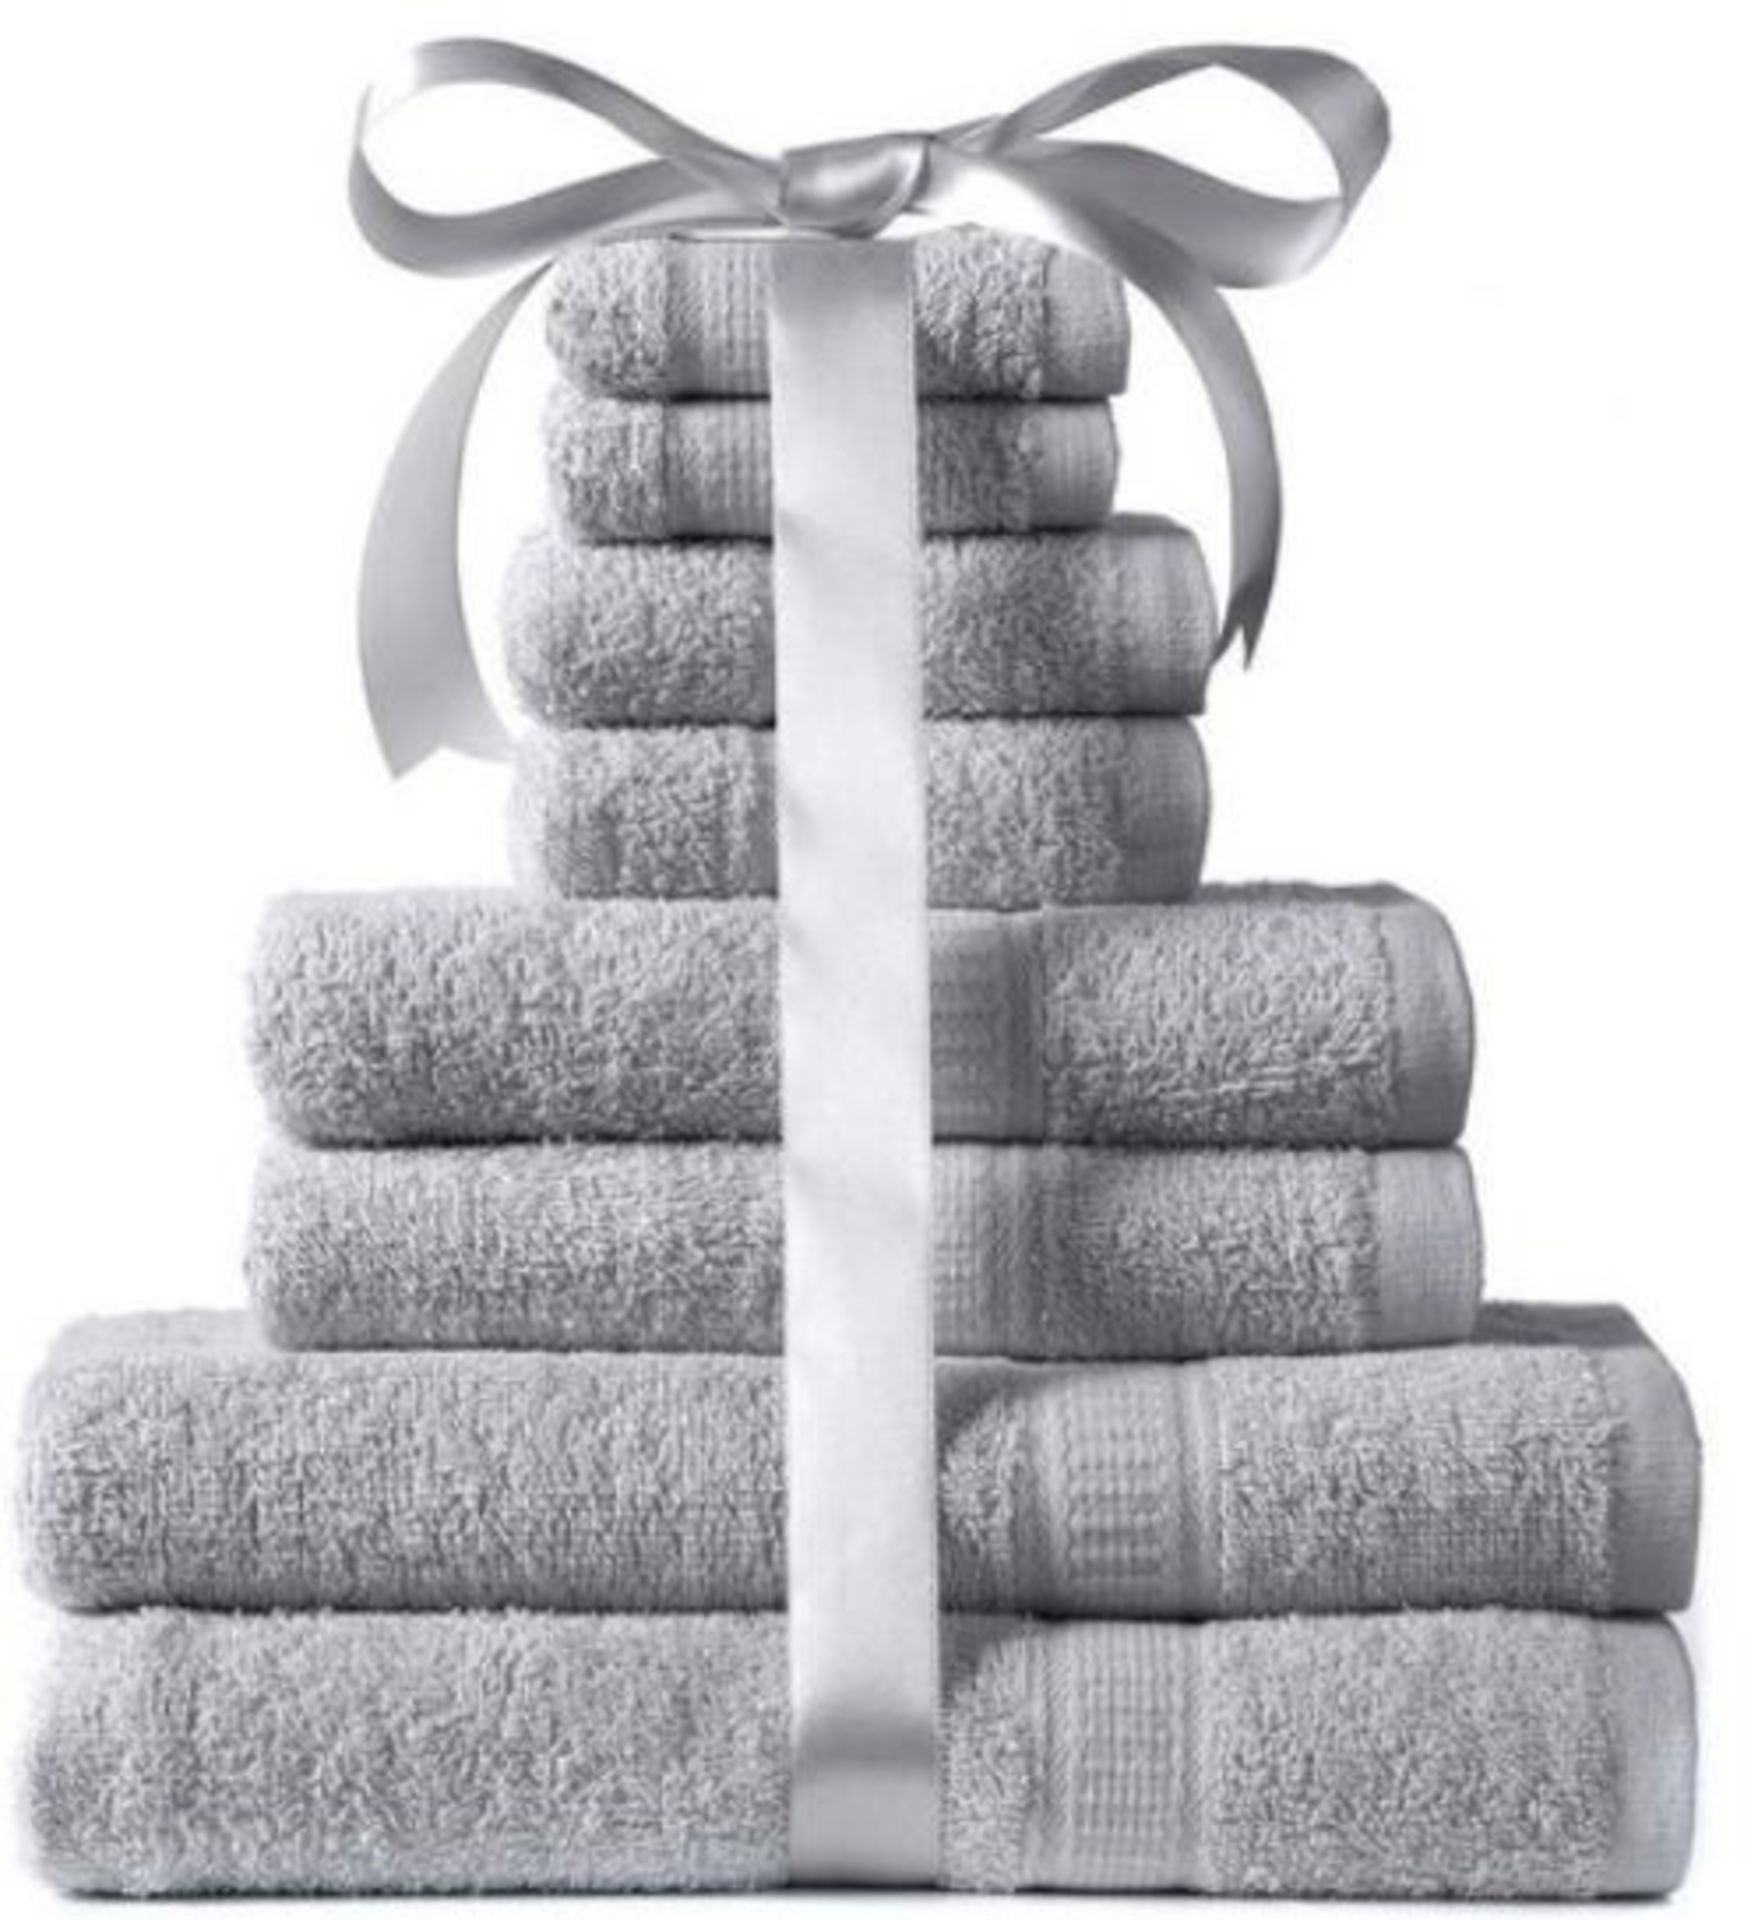 1 BAGGED 8 PIECE TOWEL BALE IN SILVER / RRP £24.99 (PUBLIC VIEWING AVAILABLE)